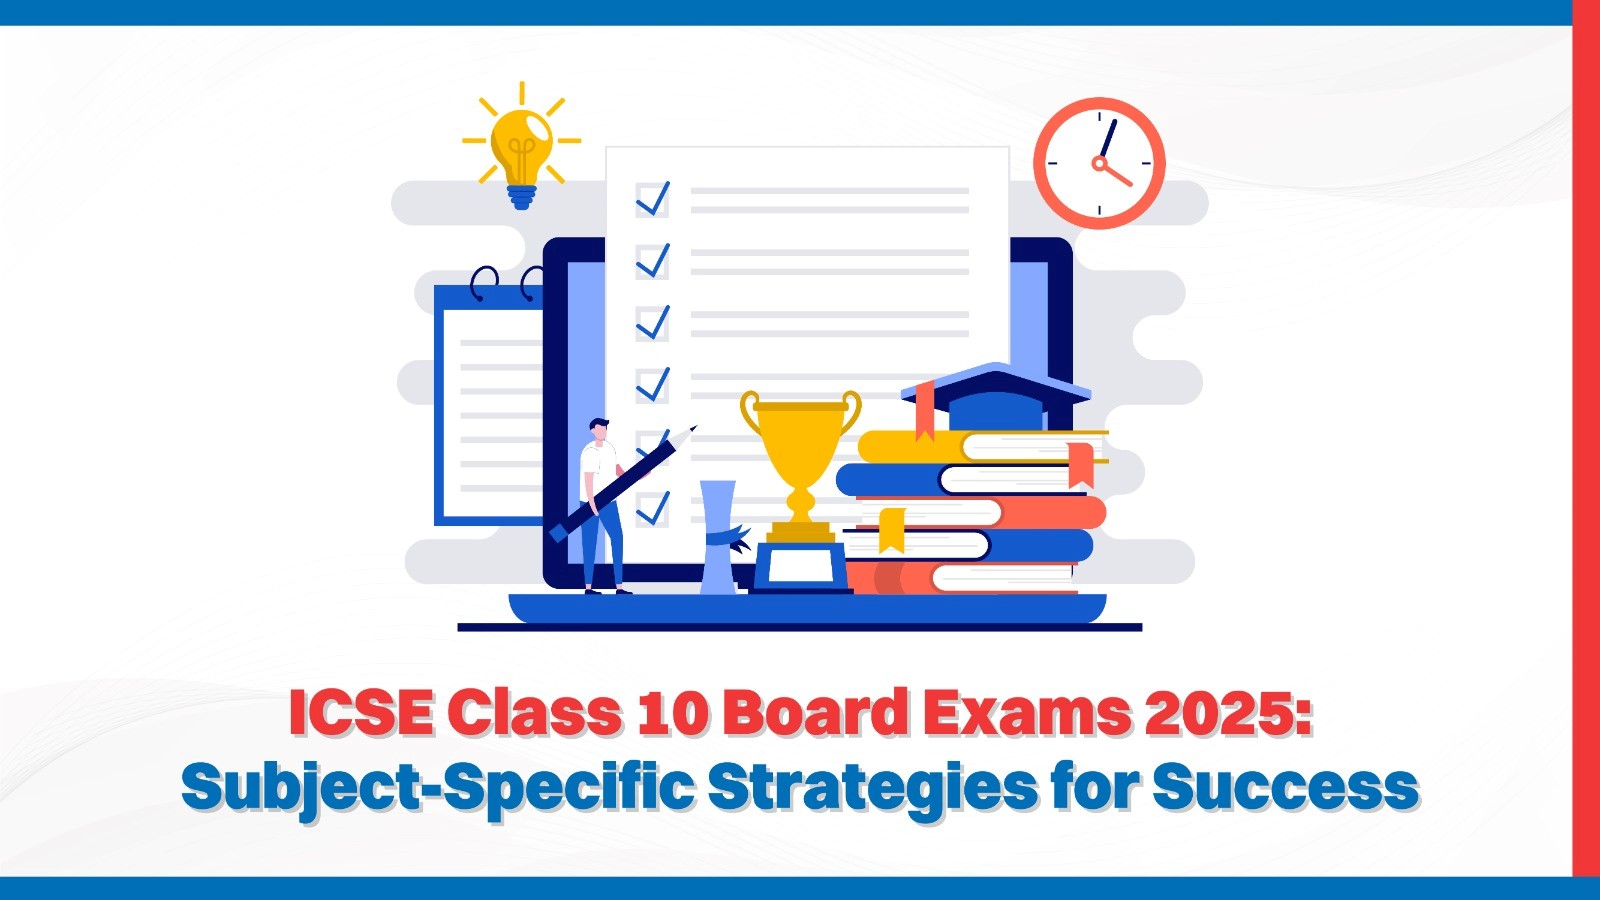 ICSE Class 10 Board Exams 2025 Subject-Specific Strategies for Success.jpg